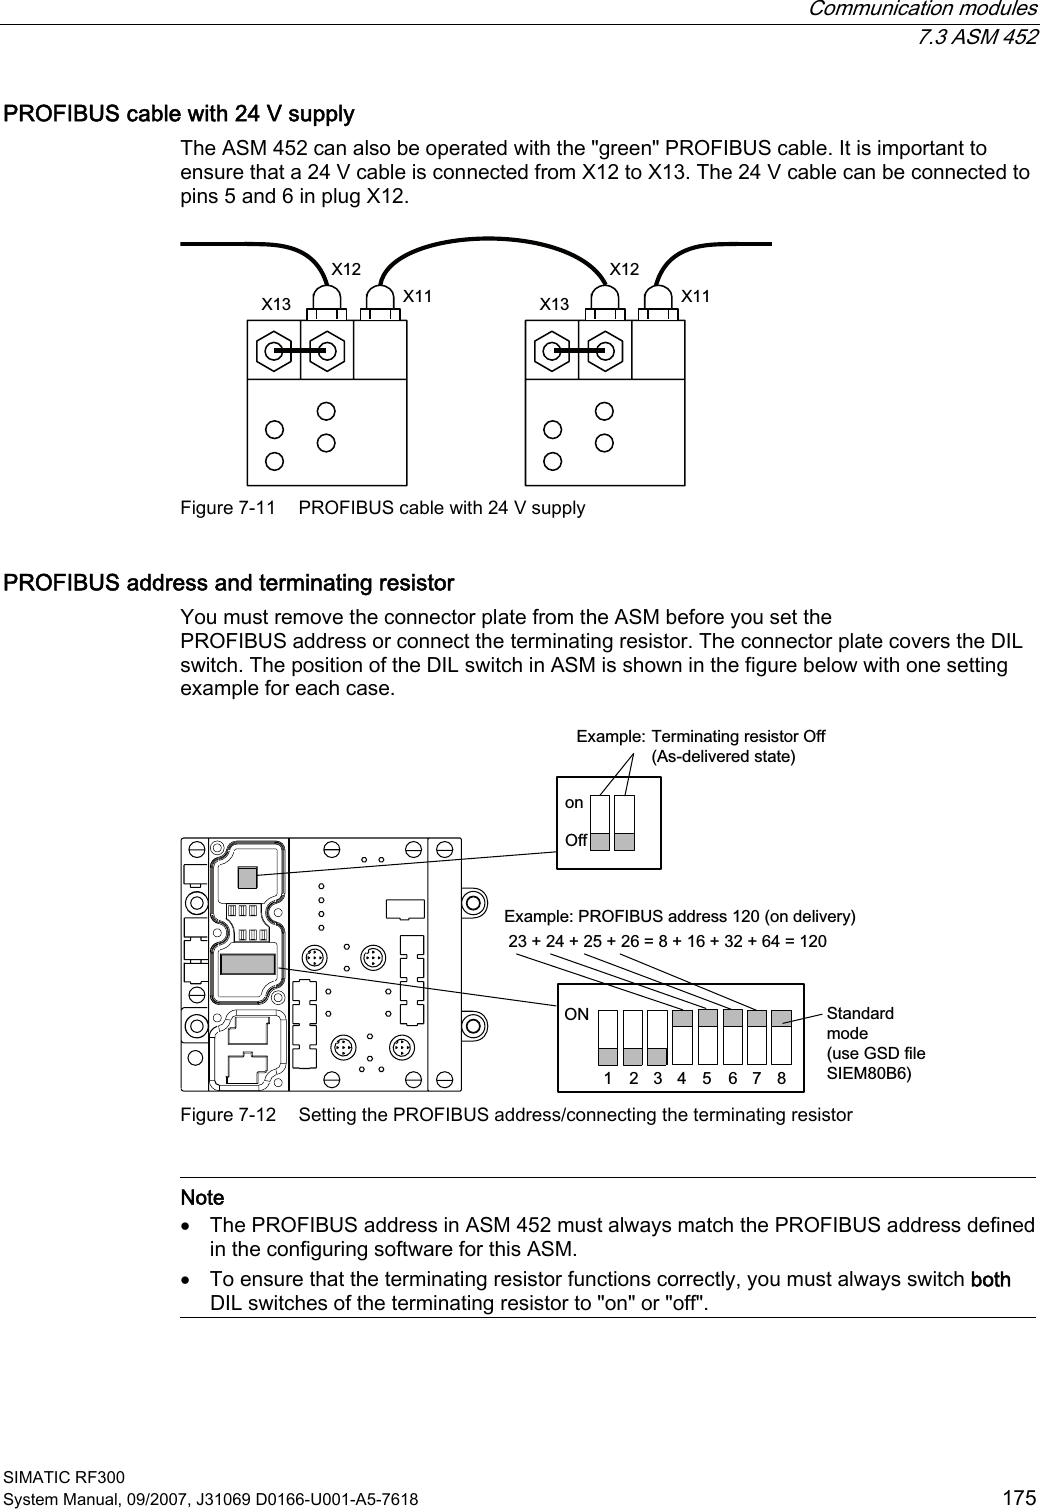  Communication modules  7.3 ASM 452 SIMATIC RF300 System Manual, 09/2007, J31069 D0166-U001-A5-7618  175 PROFIBUS cable with 24 V supply The ASM 452 can also be operated with the &quot;green&quot; PROFIBUS cable. It is important to ensure that a 24 V cable is connected from X12 to X13. The 24 V cable can be connected to pins 5 and 6 in plug X12. ; ;;; ;; Figure 7-11  PROFIBUS cable with 24 V supply PROFIBUS address and terminating resistor You must remove the connector plate from the ASM before you set the  PROFIBUS address or connect the terminating resistor. The connector plate covers the DIL switch. The position of the DIL switch in ASM is shown in the figure below with one setting example for each case. 212IIRQ  ([DPSOH352),%86DGGUHVVRQGHOLYHU\([DPSOH7HUPLQDWLQJUHVLVWRU2II $VGHOLYHUHGVWDWH6WDQGDUGPRGHXVH*6&apos;ILOH6,(0%   Figure 7-12  Setting the PROFIBUS address/connecting the terminating resistor   Note • The PROFIBUS address in ASM 452 must always match the PROFIBUS address defined in the configuring software for this ASM. • To ensure that the terminating resistor functions correctly, you must always switch both DIL switches of the terminating resistor to &quot;on&quot; or &quot;off&quot;.  